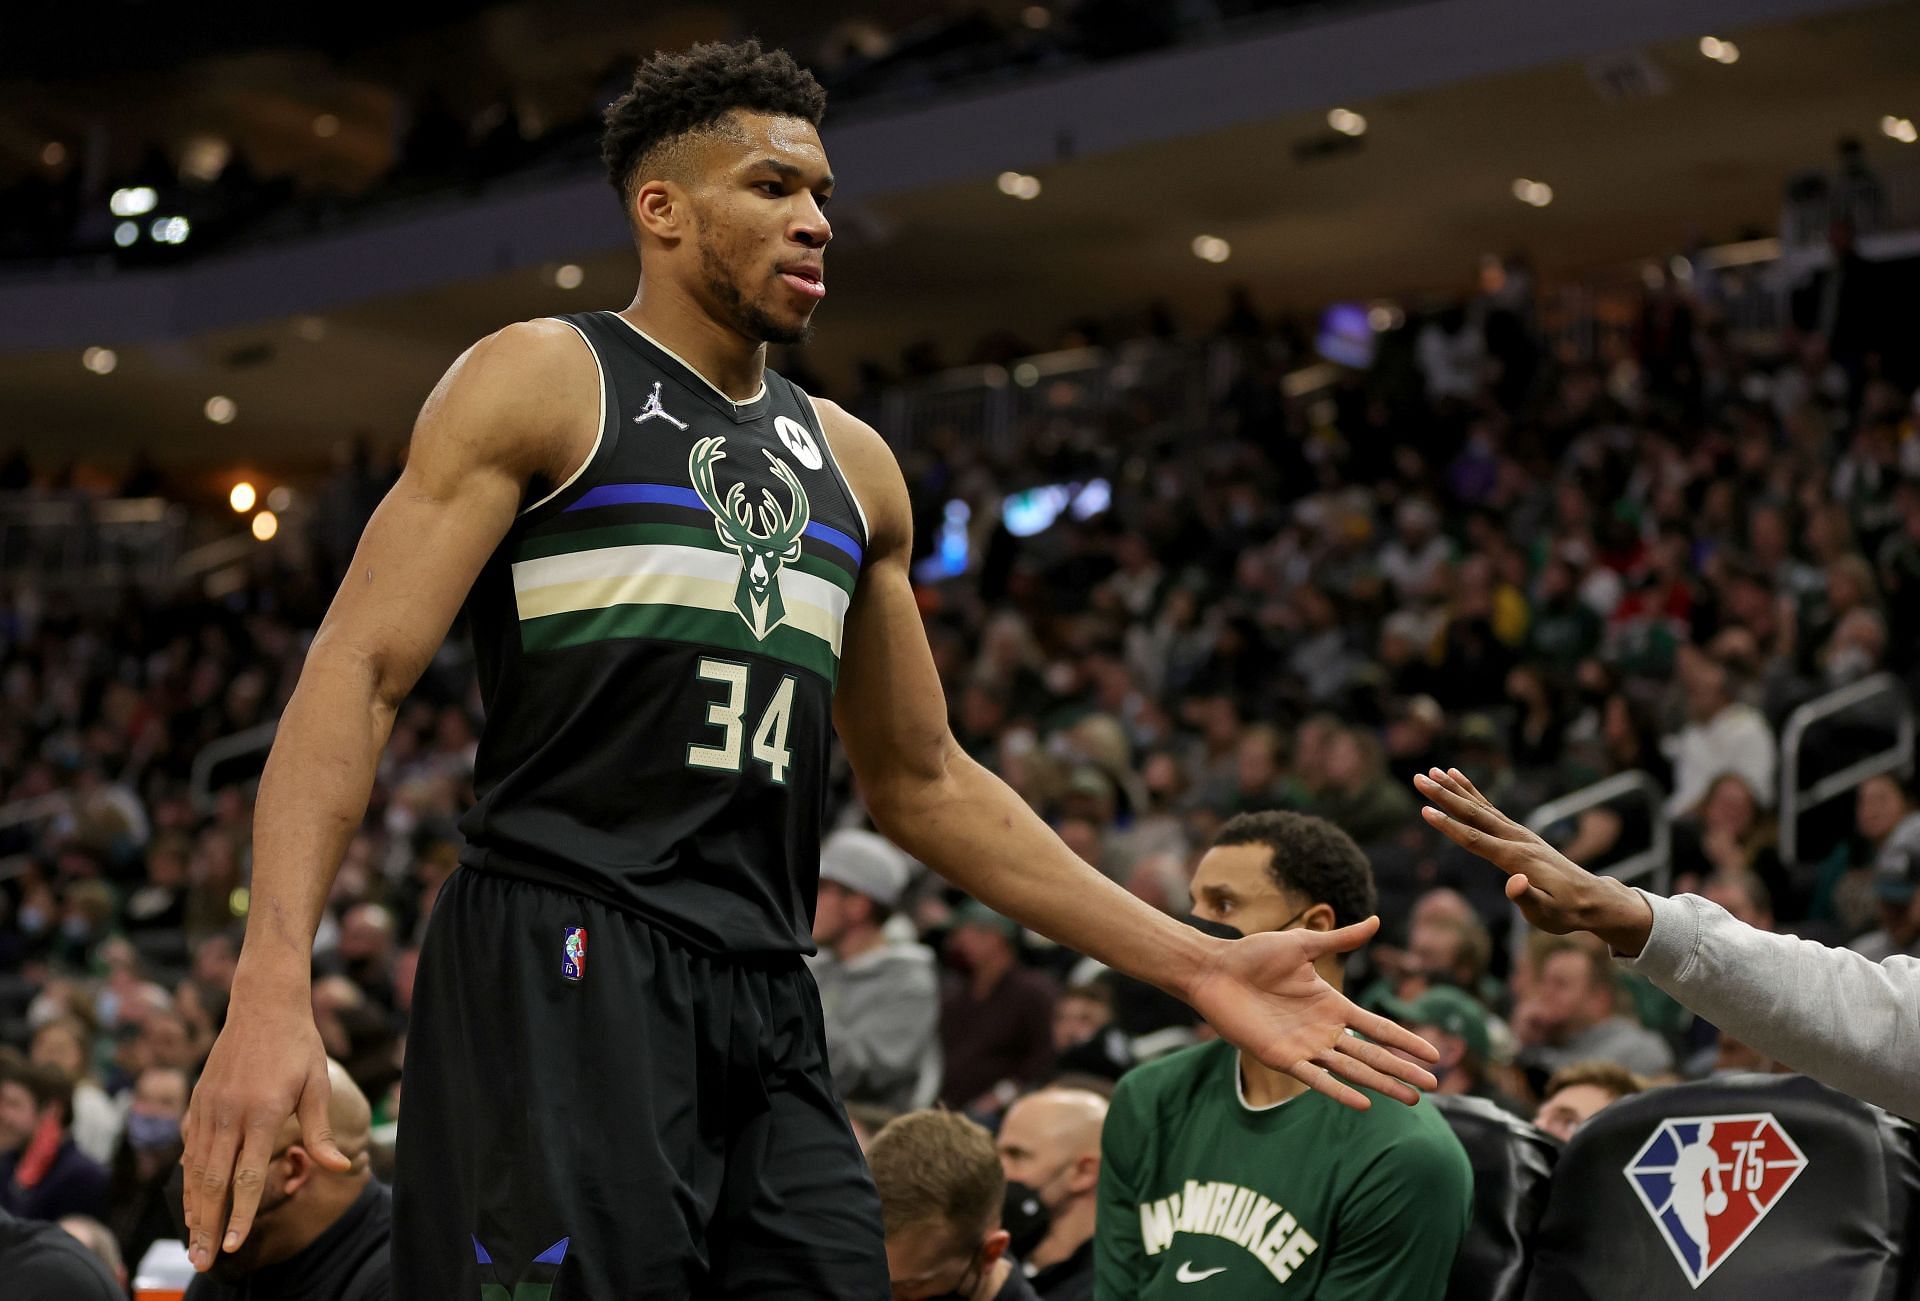 Milwaukee Bucks star Giannis Antetokounmpo greets fans in the arena during a game